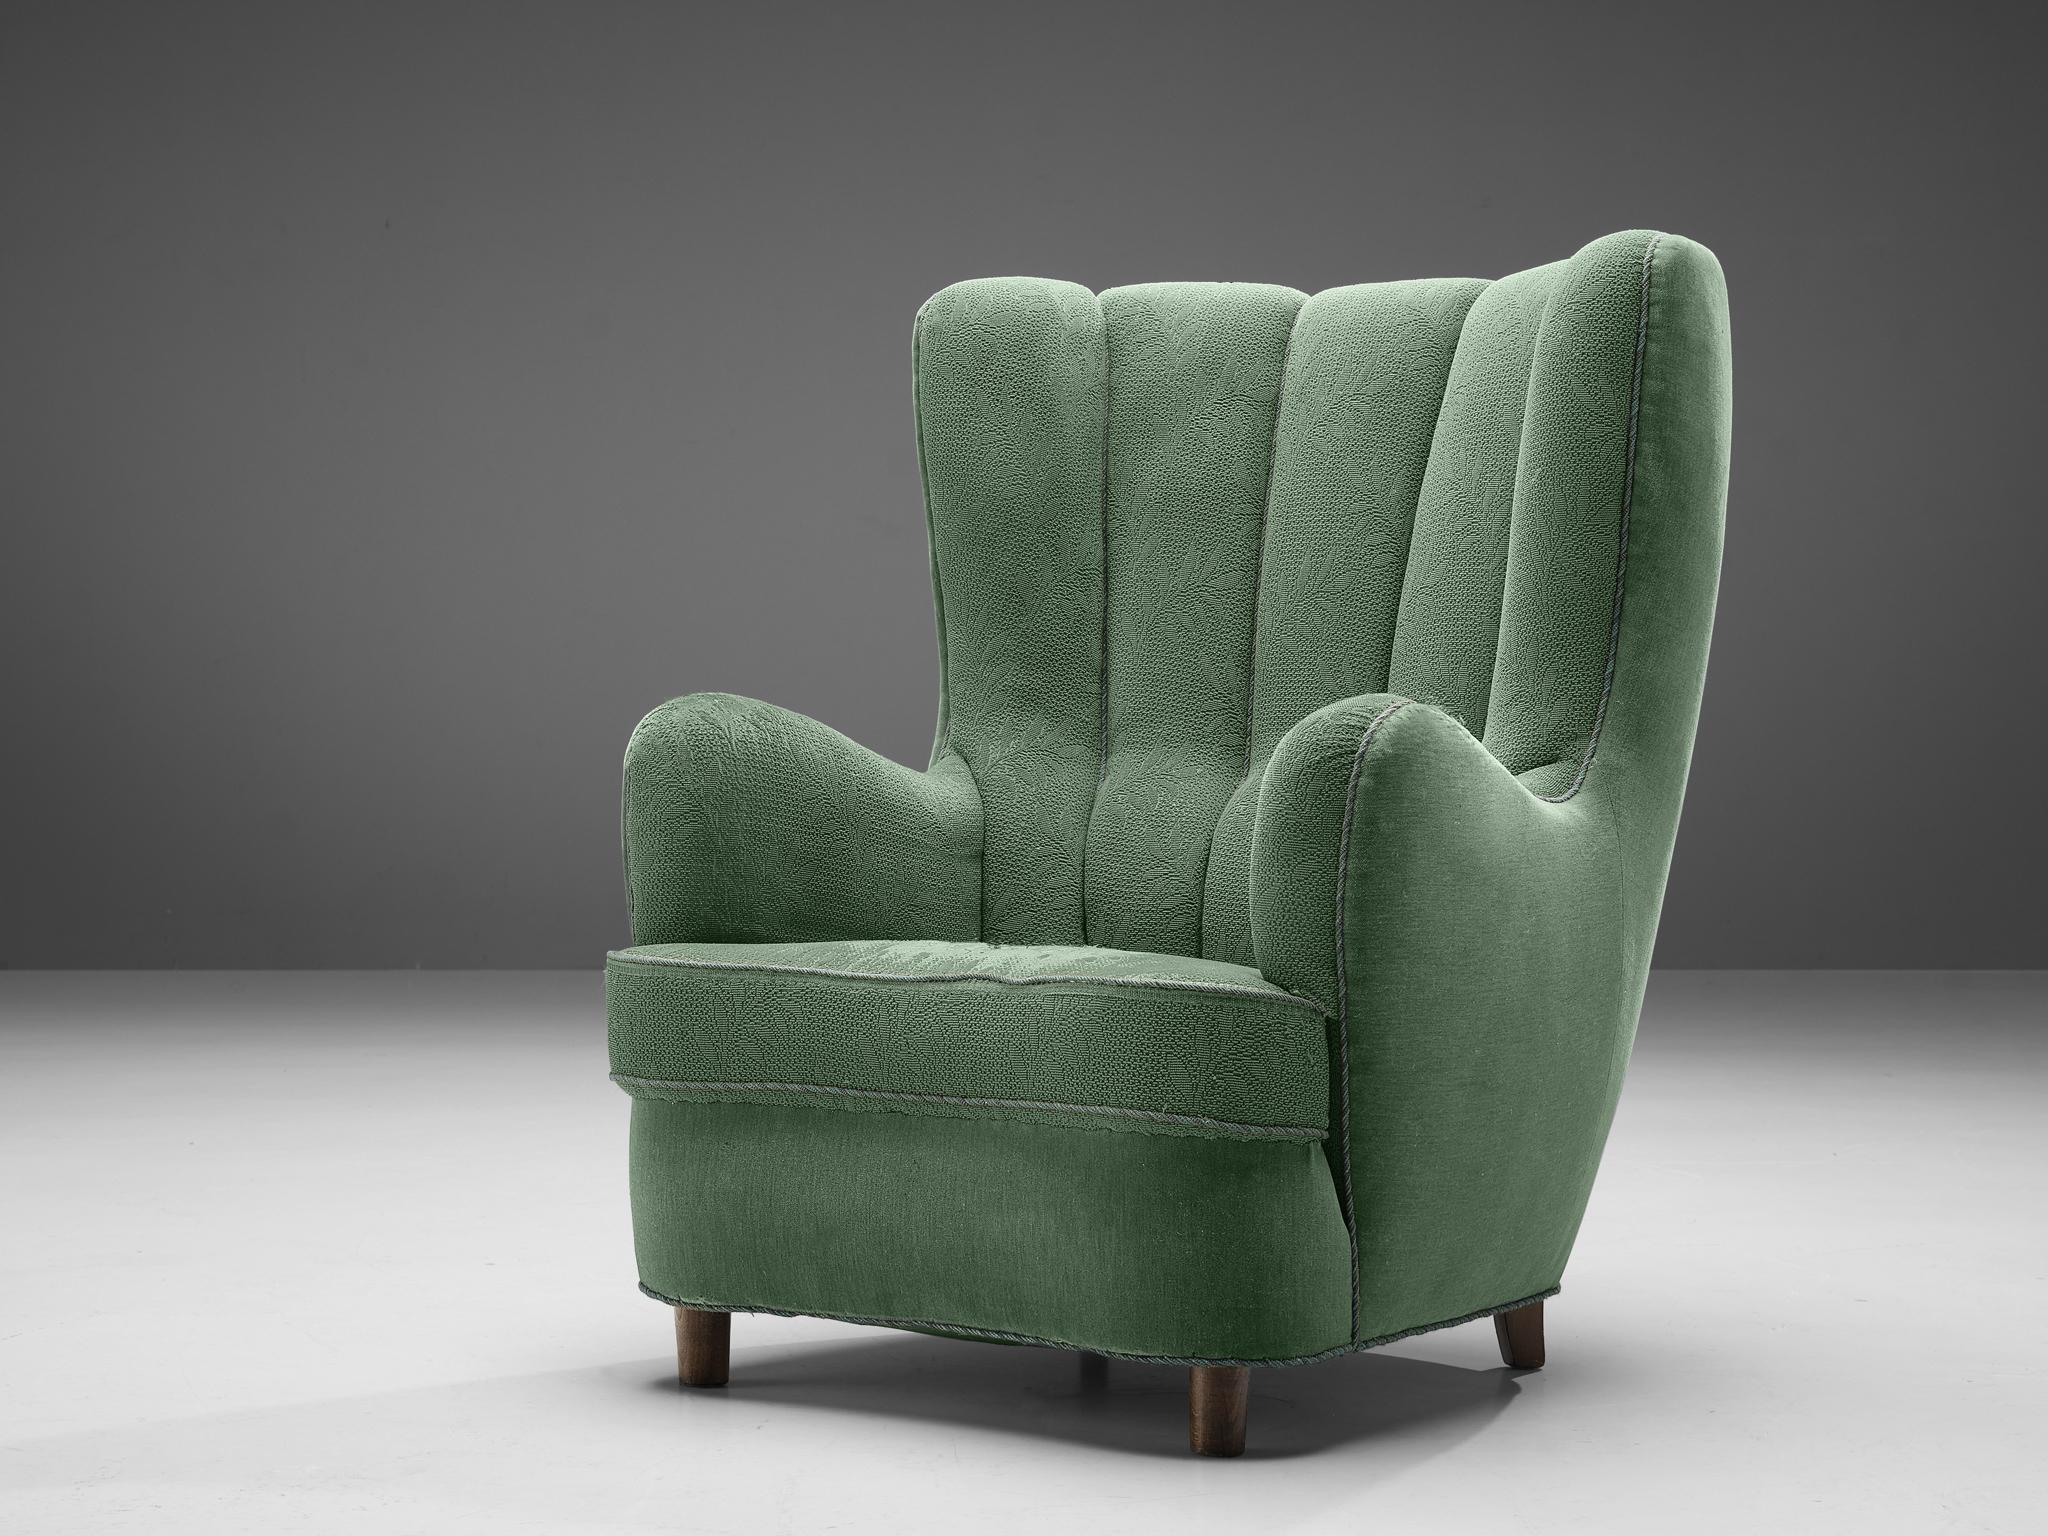 Easy chair, fabric, beech, Denmark, 1940s. 

This easy chair with its soft edges, tufted lines, and sturdy shape is typical for Danish design of the Art Deco period. The imposing, high backrest creates a comfortable experience, stimulating the